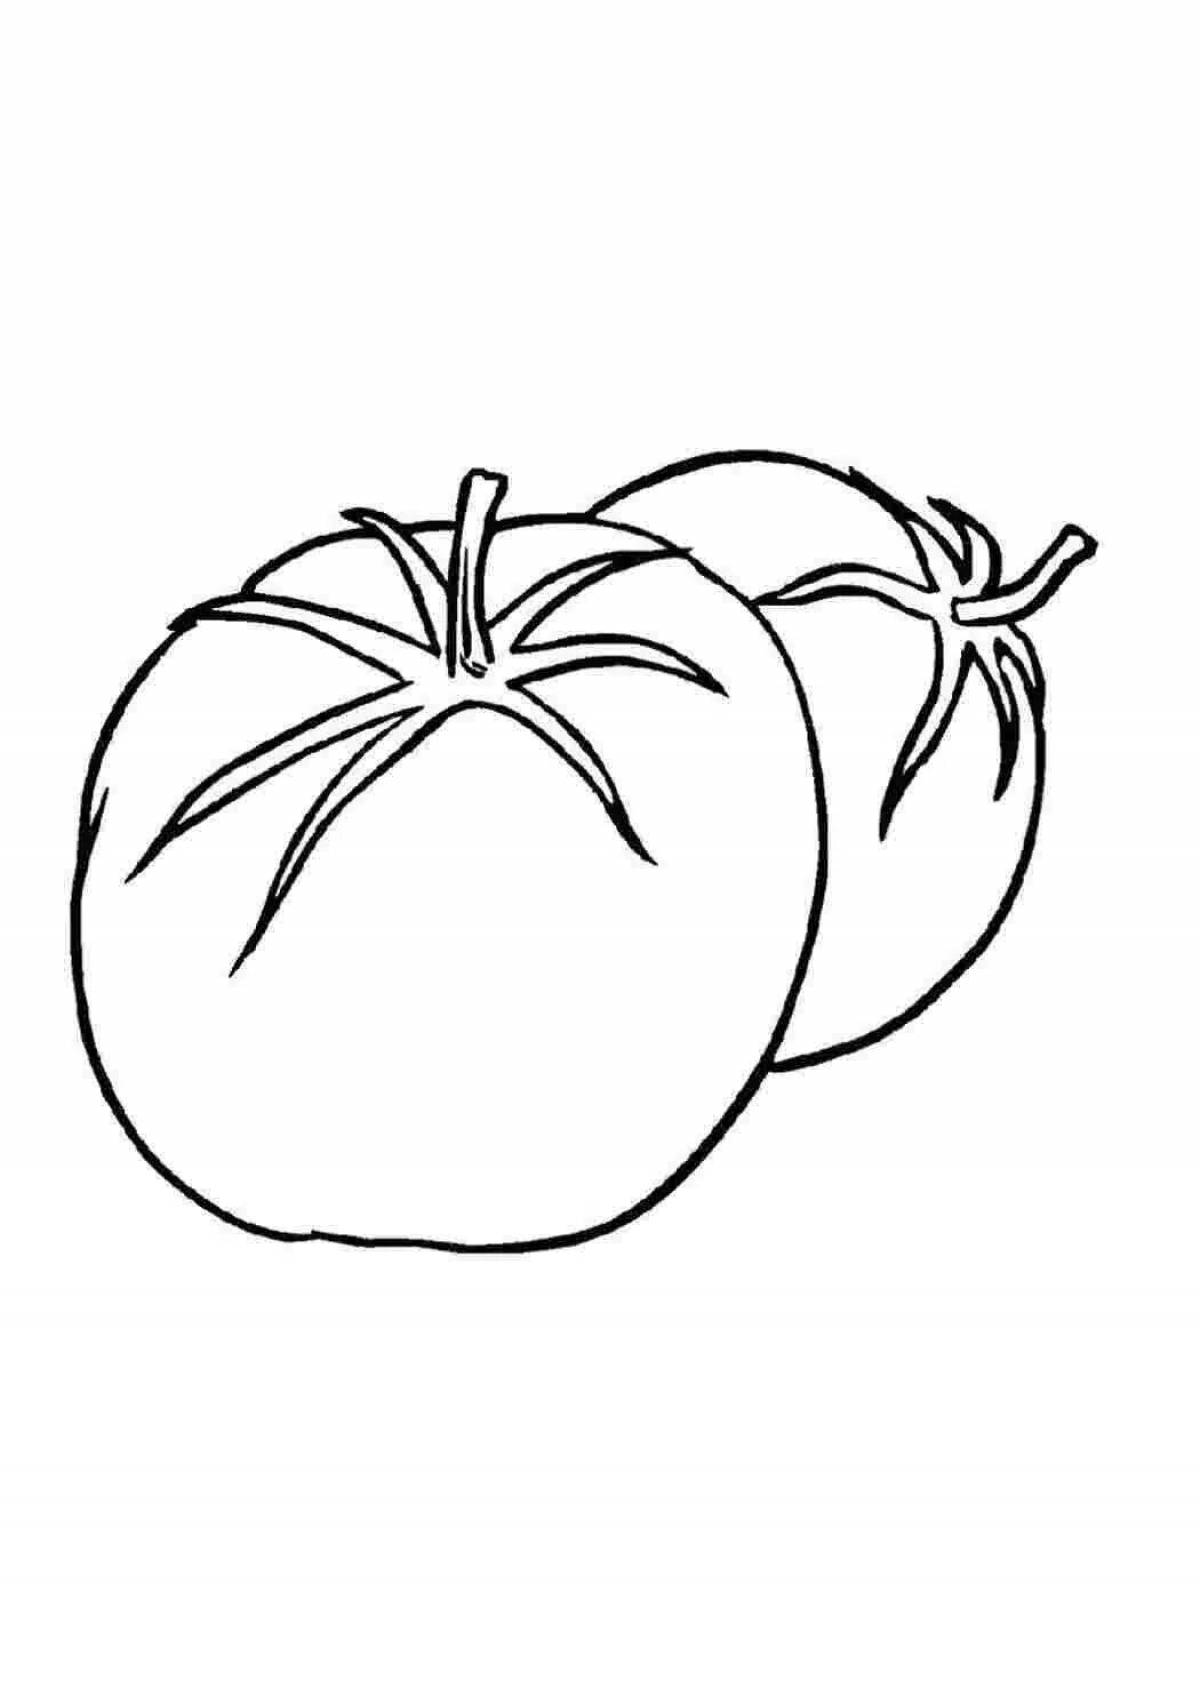 Awesome cucumber and tomato coloring pages for preschoolers